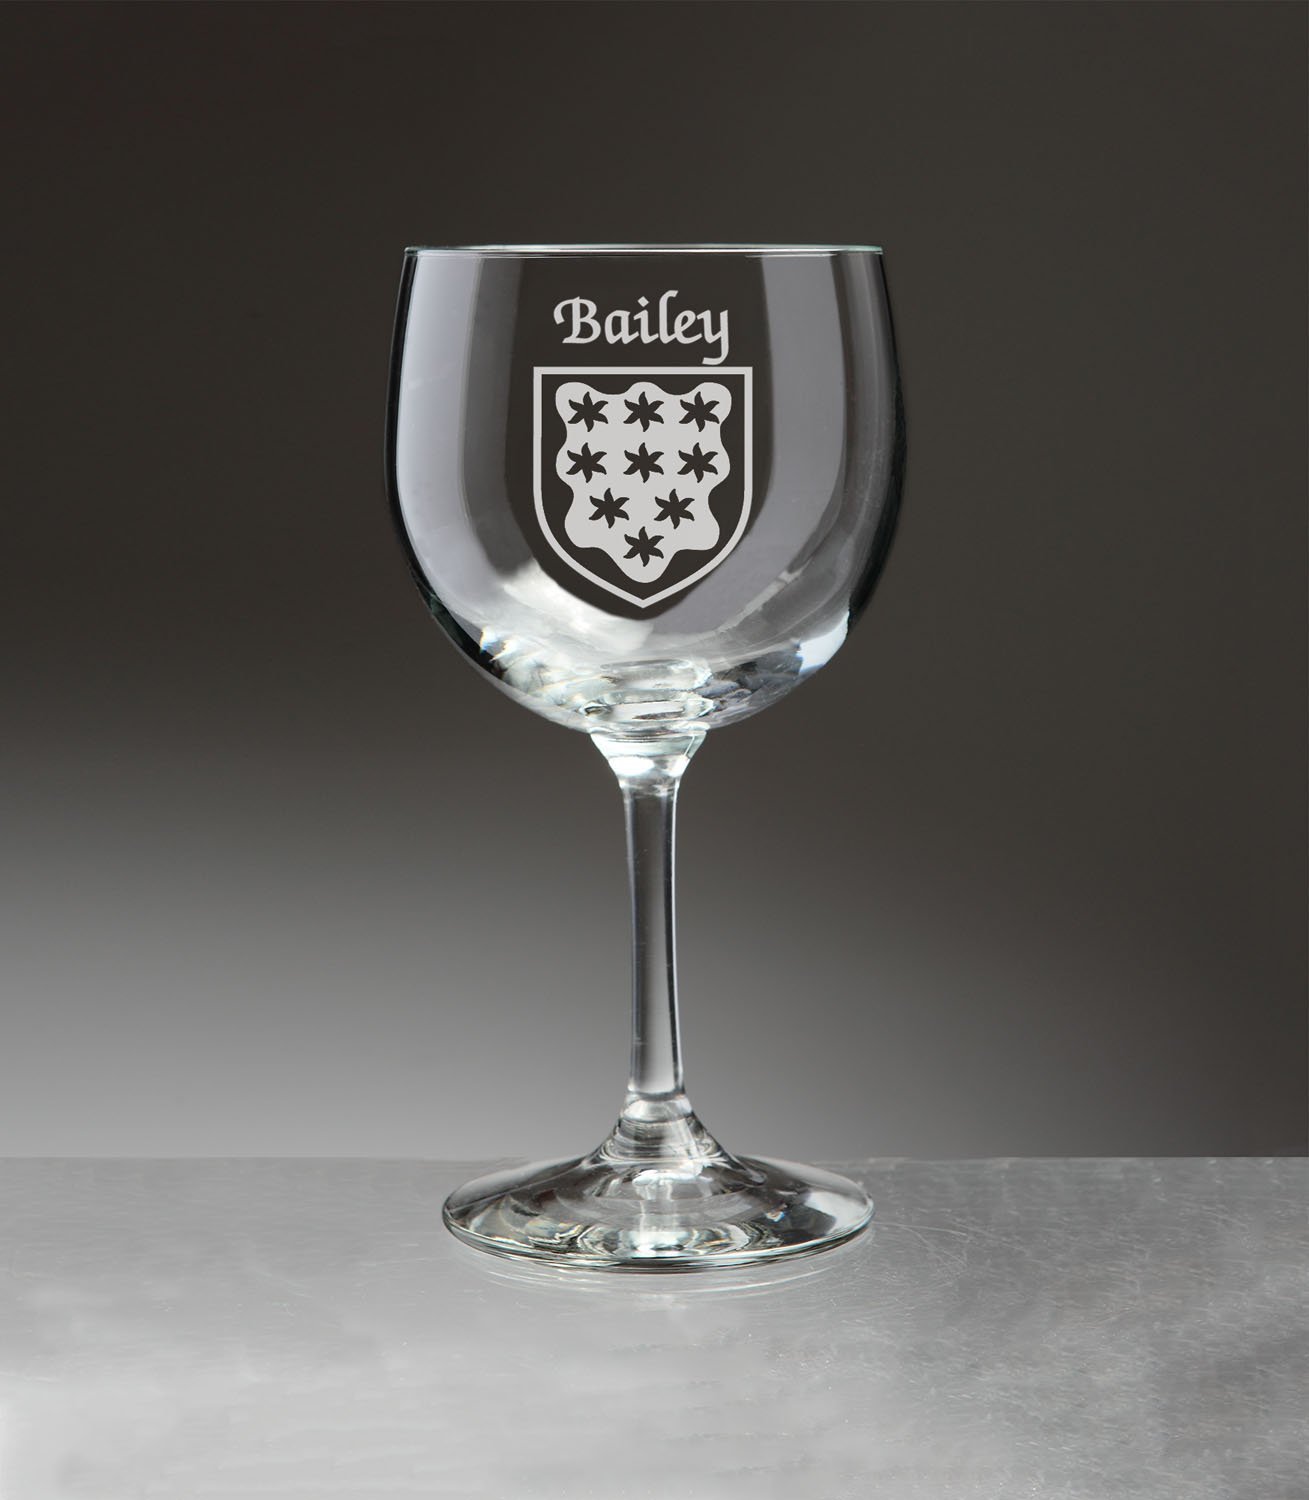 Primary image for Bailey Irish Coat of Arms Red Wine Glasses - Set of 4 (Sand Etched)